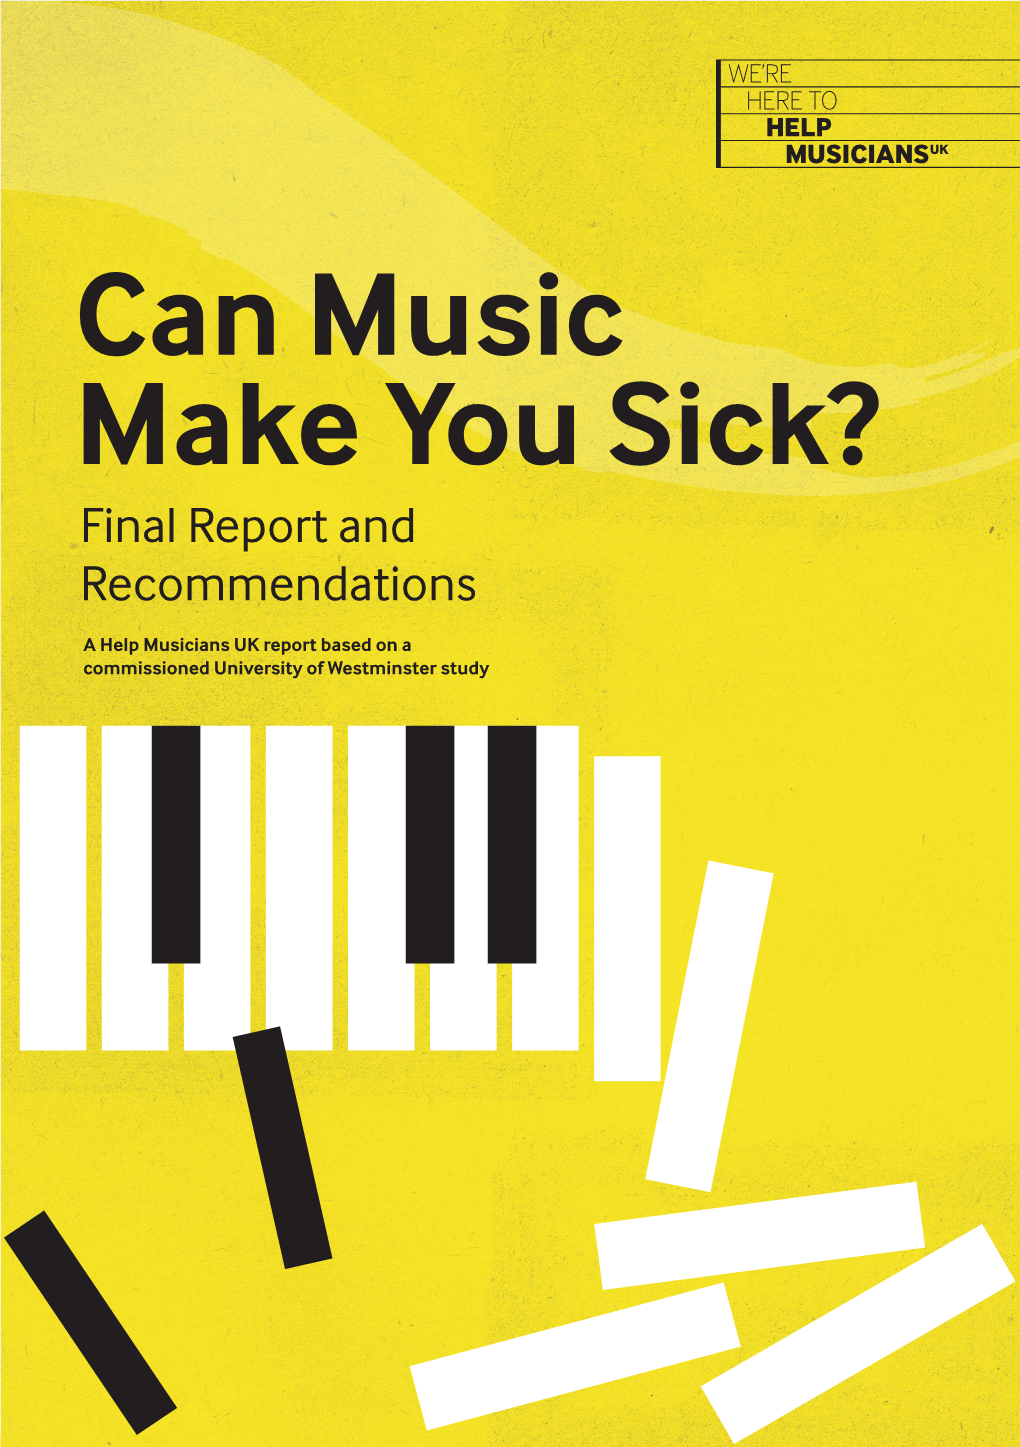 Can Music Make You Sick? Final Report and Recommendations